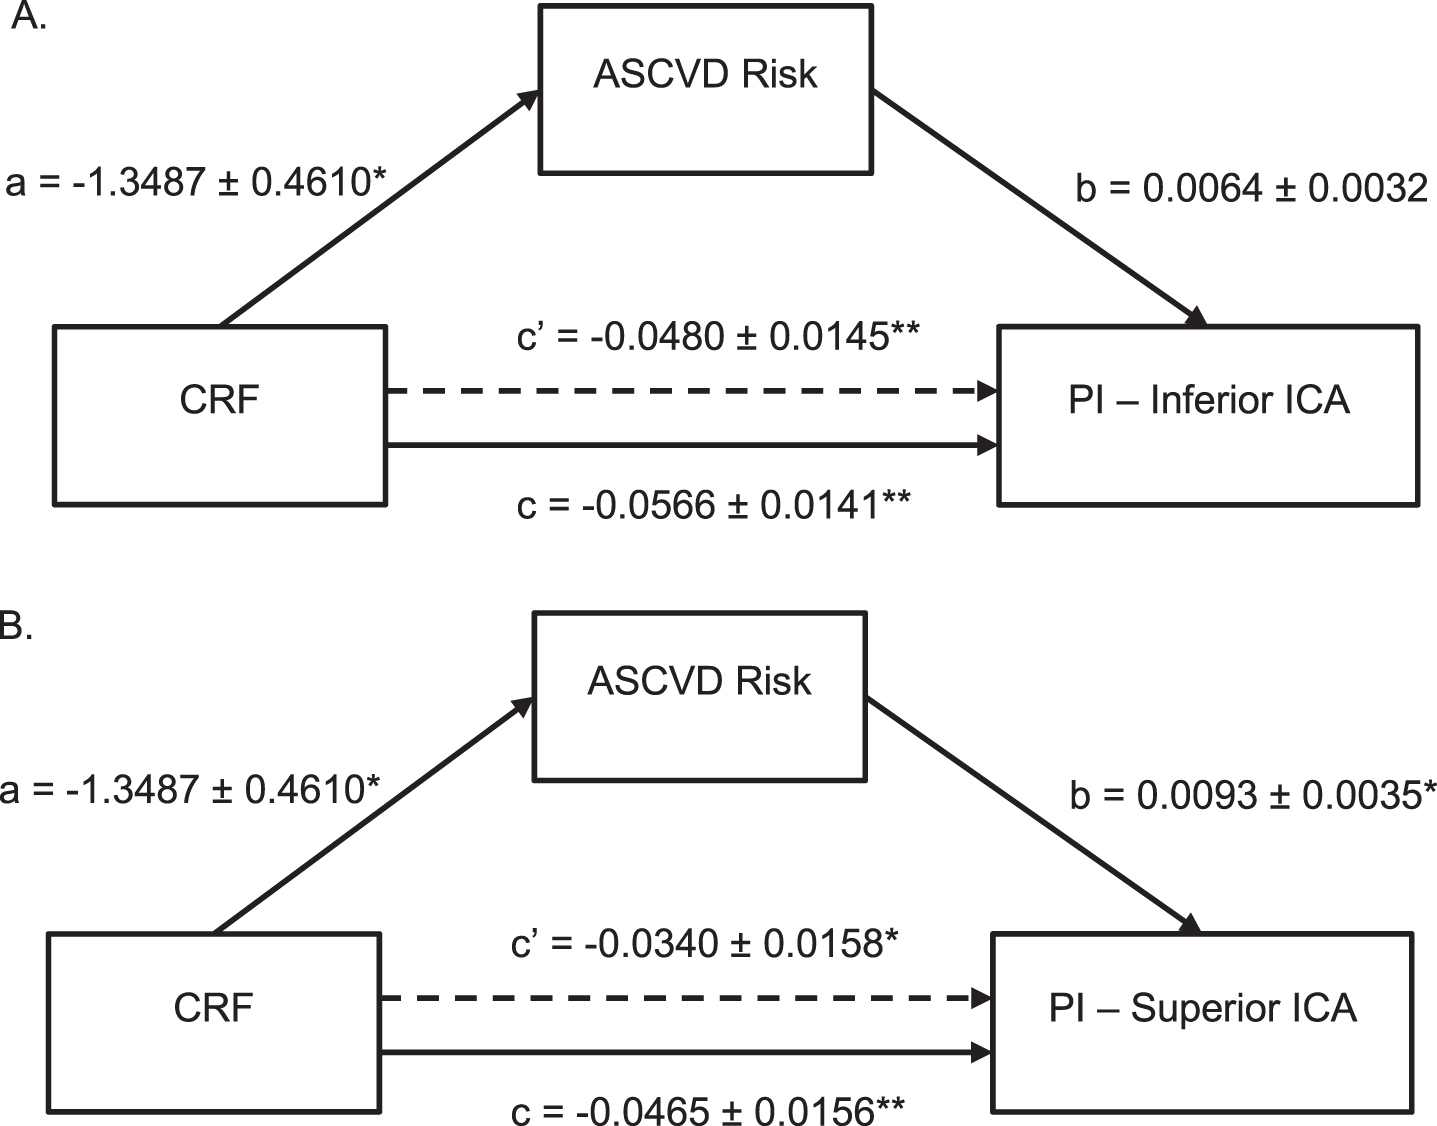 Mediation Analysis of CRF, Vessel PI, and ASCVD Risk Score. Shows ASCVD Risk Score partially mediated the association between CRF and vessel PI in both the inferior (A) and superior ICA (B). Standard coefficients are presented along with standard errors for each path of the mediation model. Note that c represents the total effect and c’ represents the direct effect of CRF on PI. * indicates significance at p < 0.05 and ** indicates significance at p < 0.01. ASCVD = atherosclerotic cardiovascular disease, CRF = cardiorespiratory fitness, PI = pulsatility index, ICA = internal carotid artery.